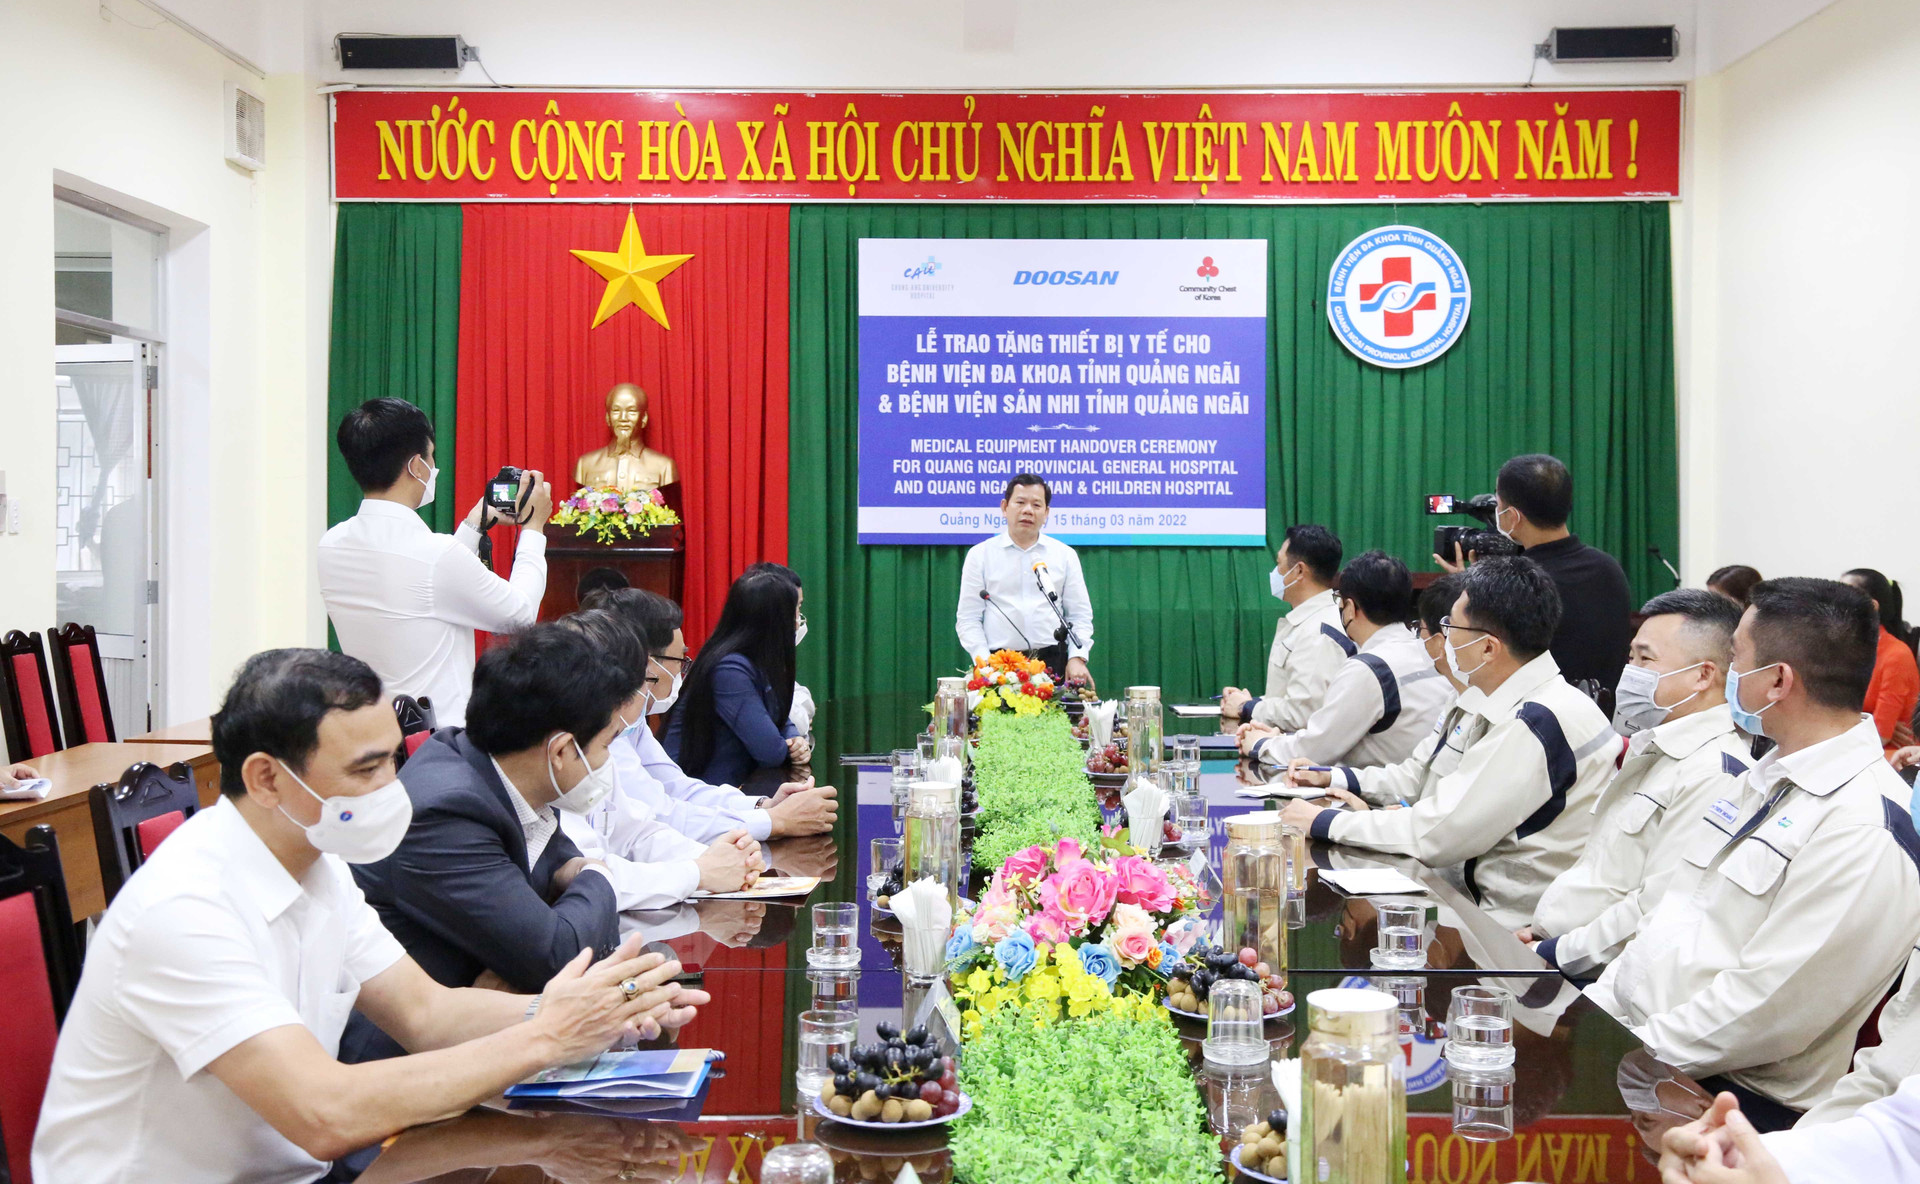 The medical equipment donation ceremony took place at the office of Quang Ngai Provincial General Hospital